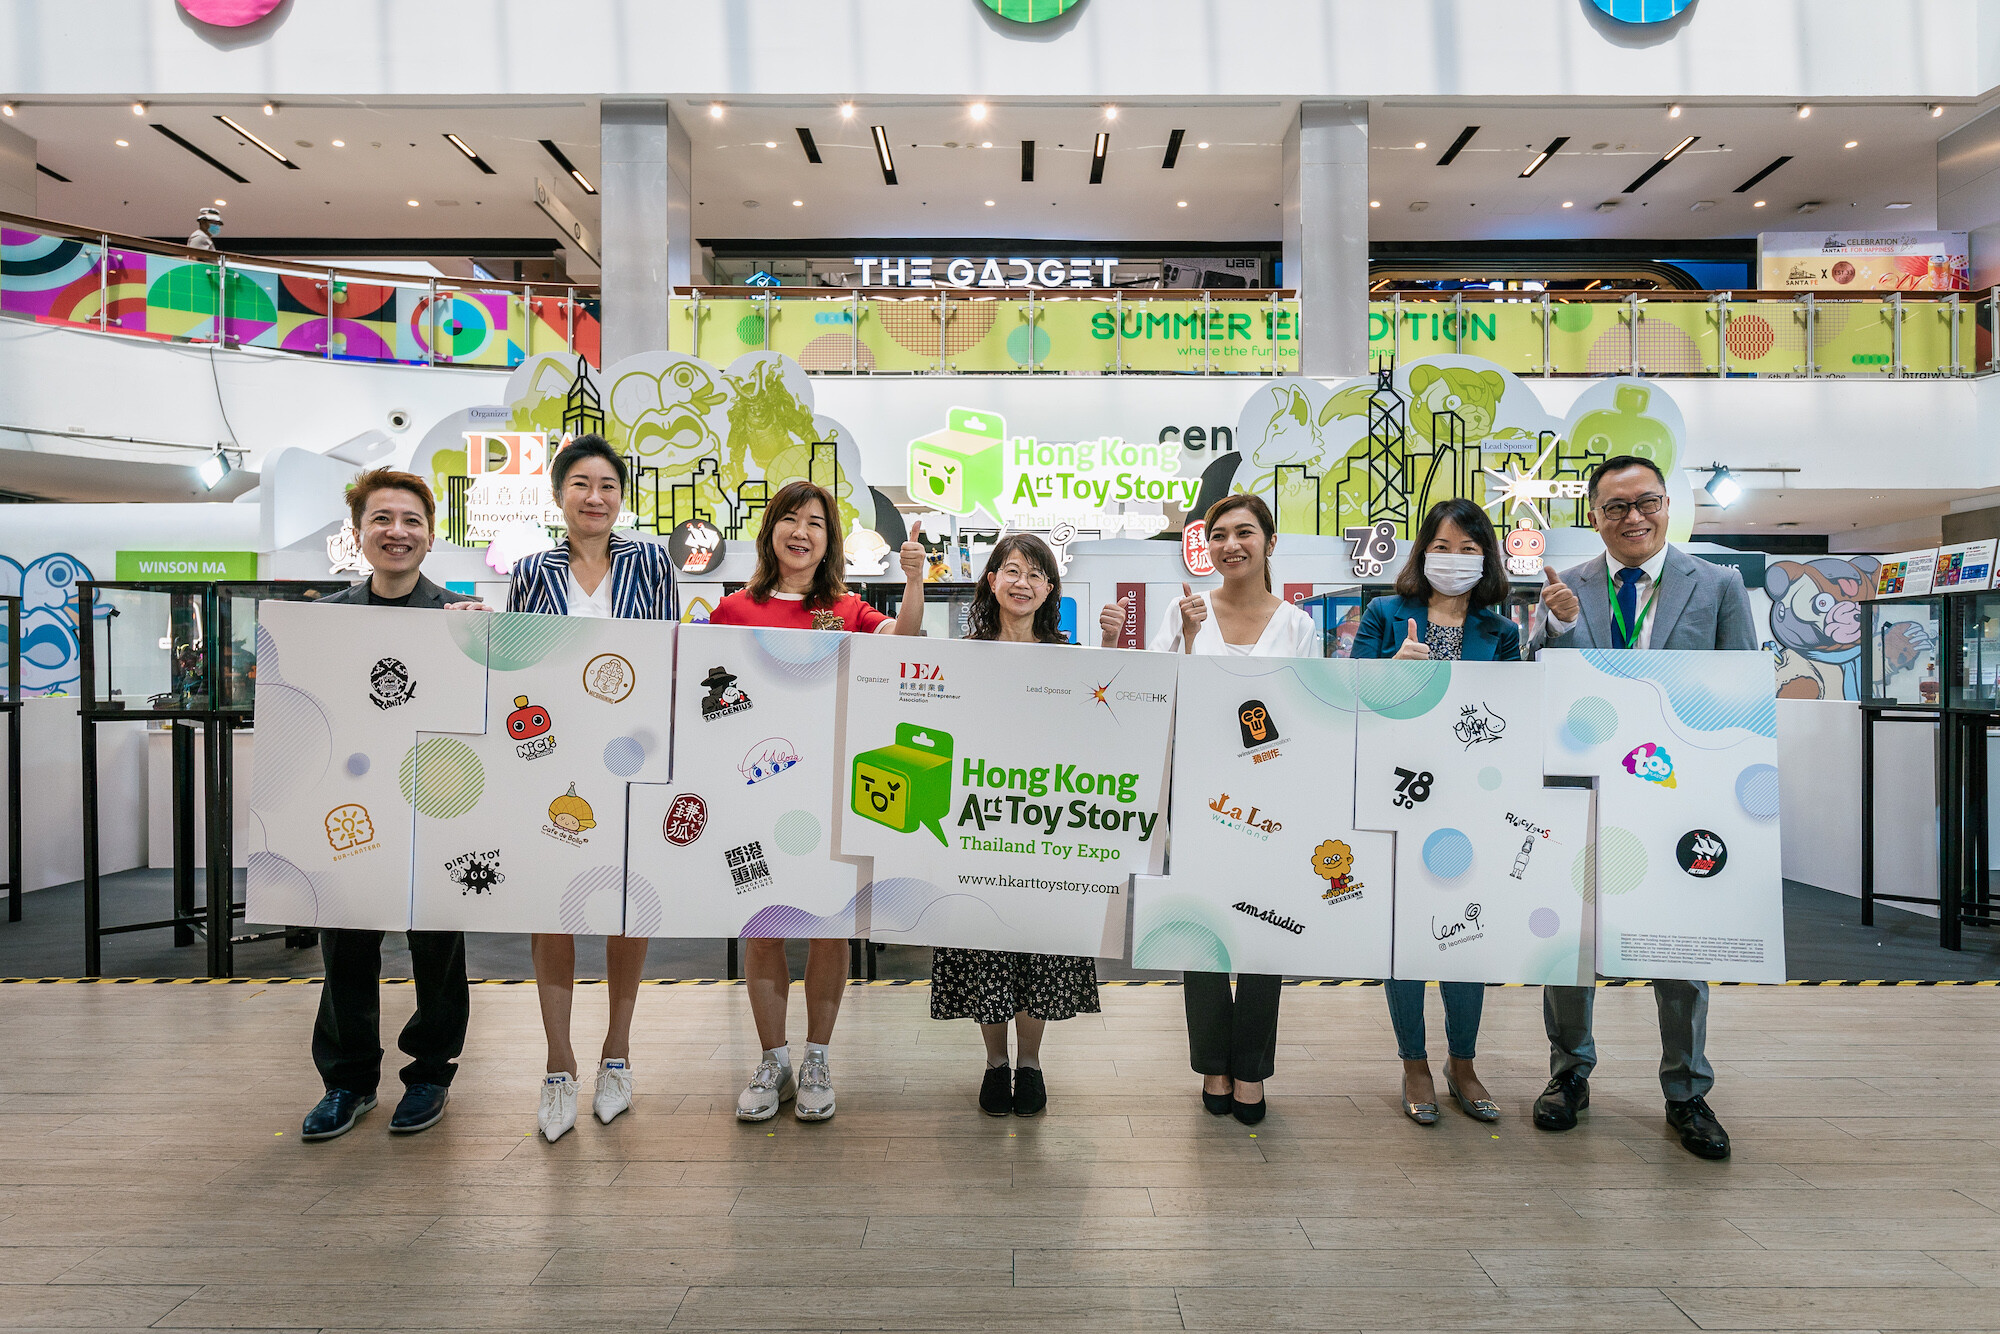 20 Hong Kong artists attend Thailand Toy Expo 2023 with the Hong Kong Pavilion to specially welcome art toy fans